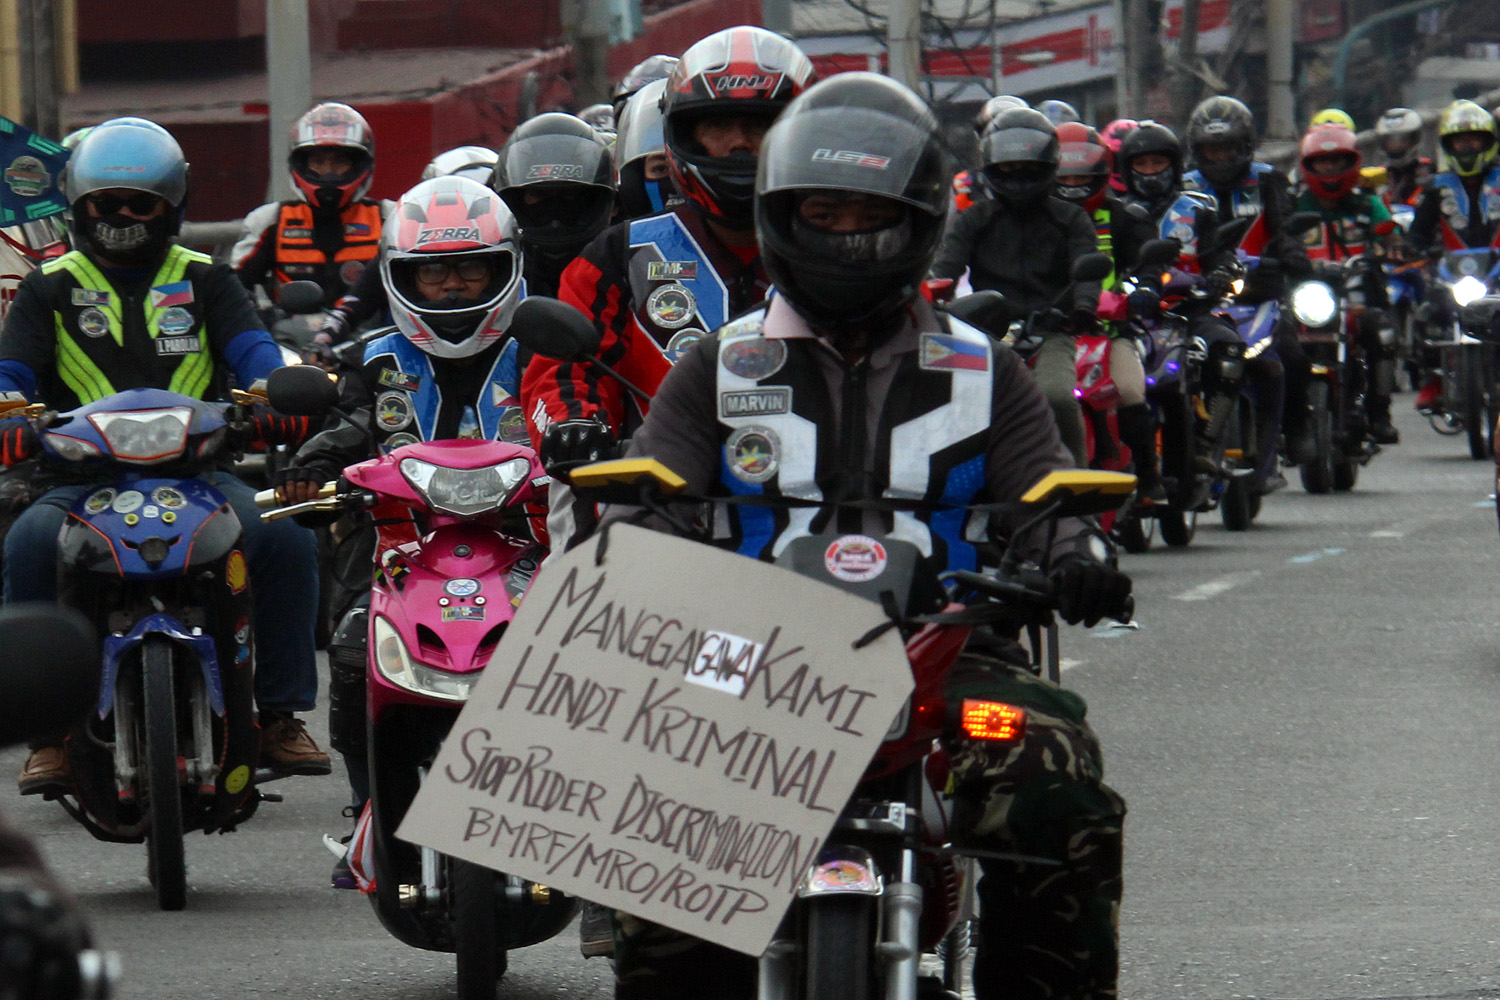 LEGAL SOON? Angkas riders join a Unity Ride on December 16, 2018, to protest the shutdown of their operations. File photo by Darren Langit/Rappler 